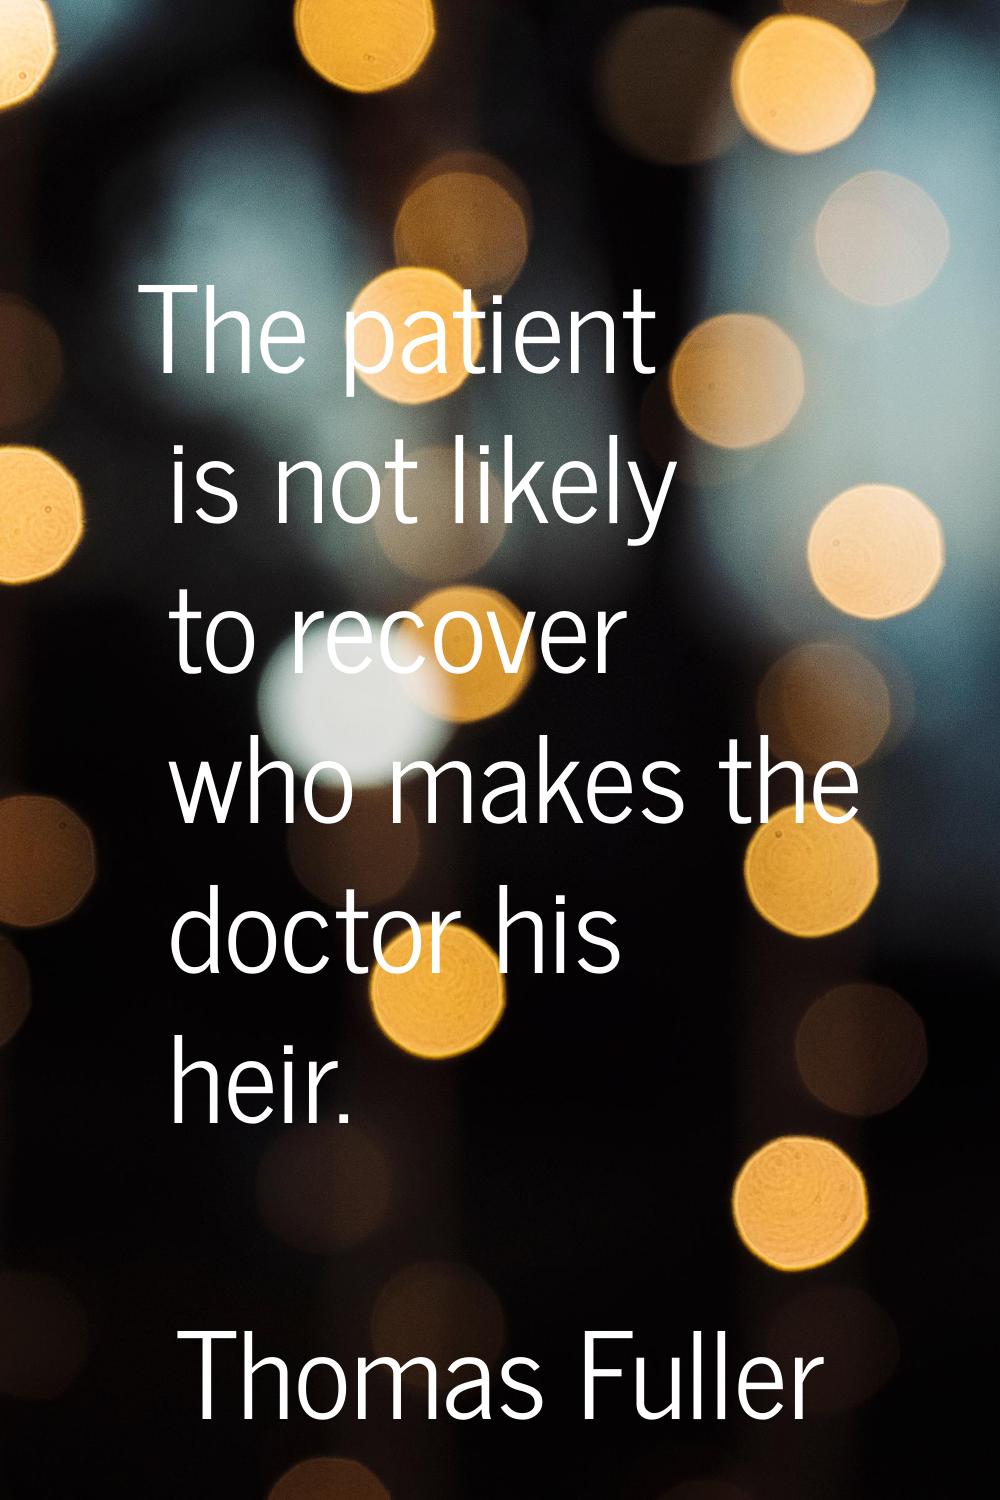 The patient is not likely to recover who makes the doctor his heir.